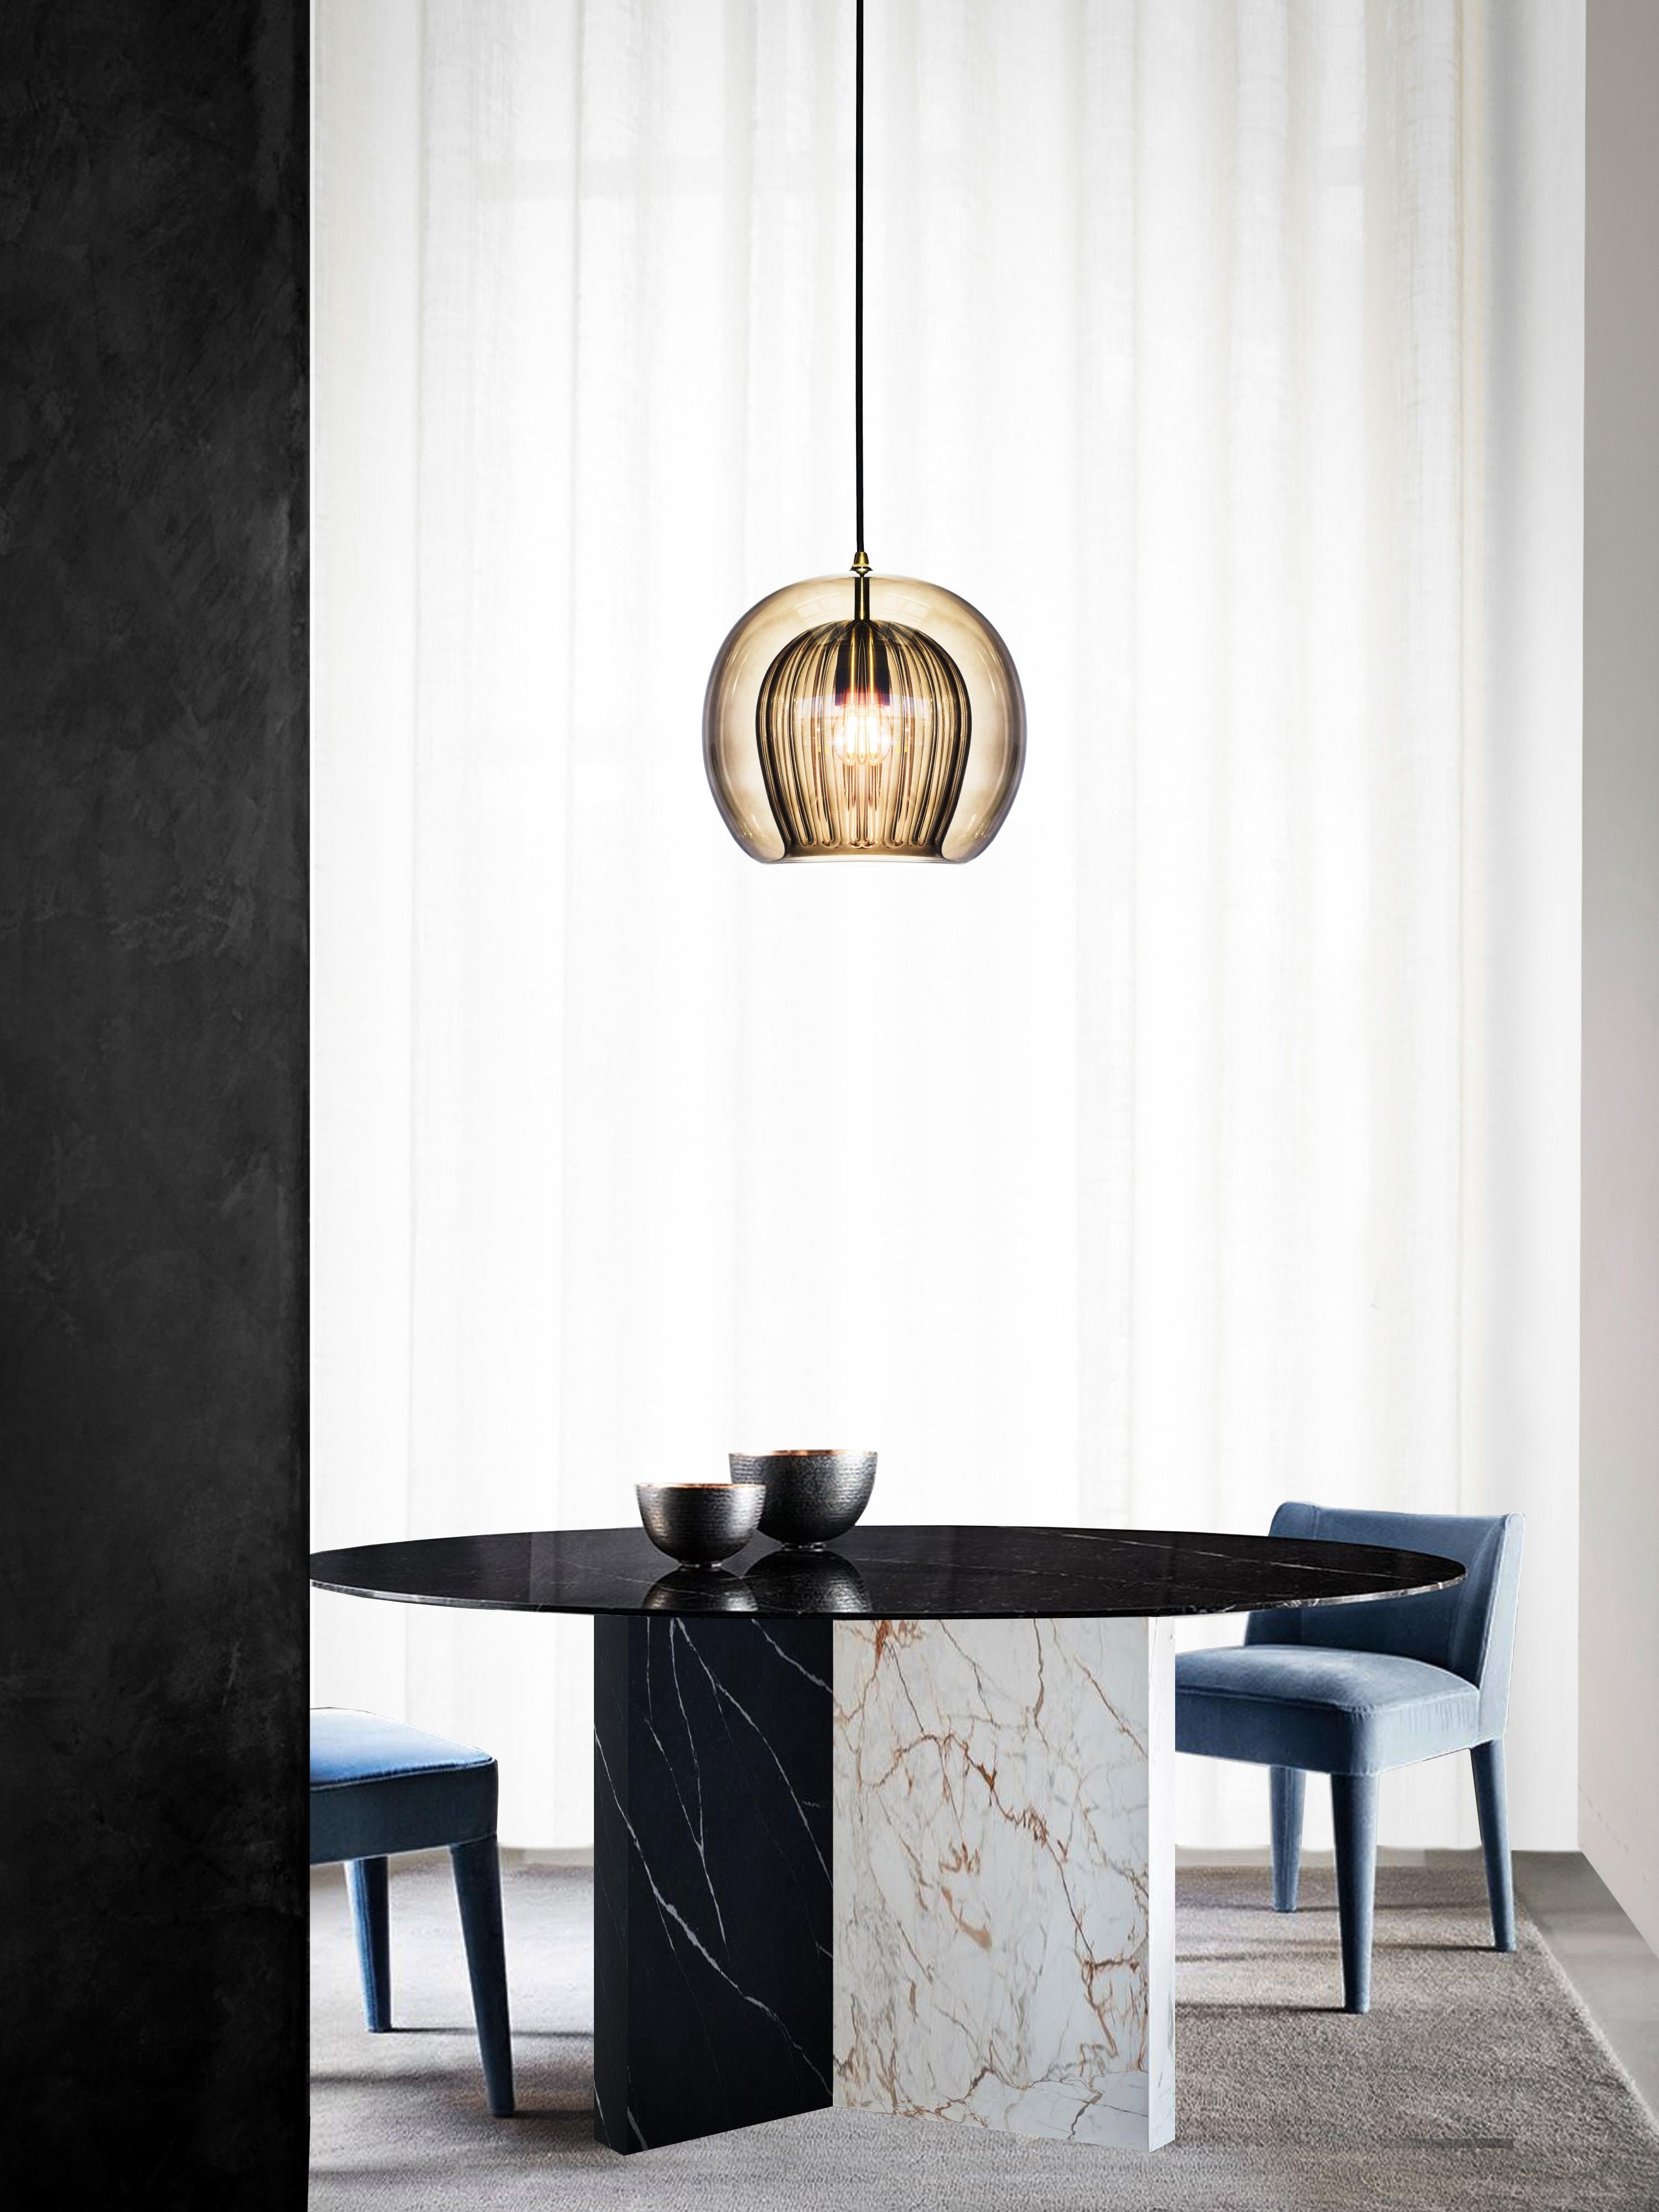 Our debut lighting collection comprising ceiling pendants, a side light and a floor standing lamp.

Handmade in Bohemia and London the collection draws upon our love for Czech artisan glass work and British engineered detailing.

Designed with